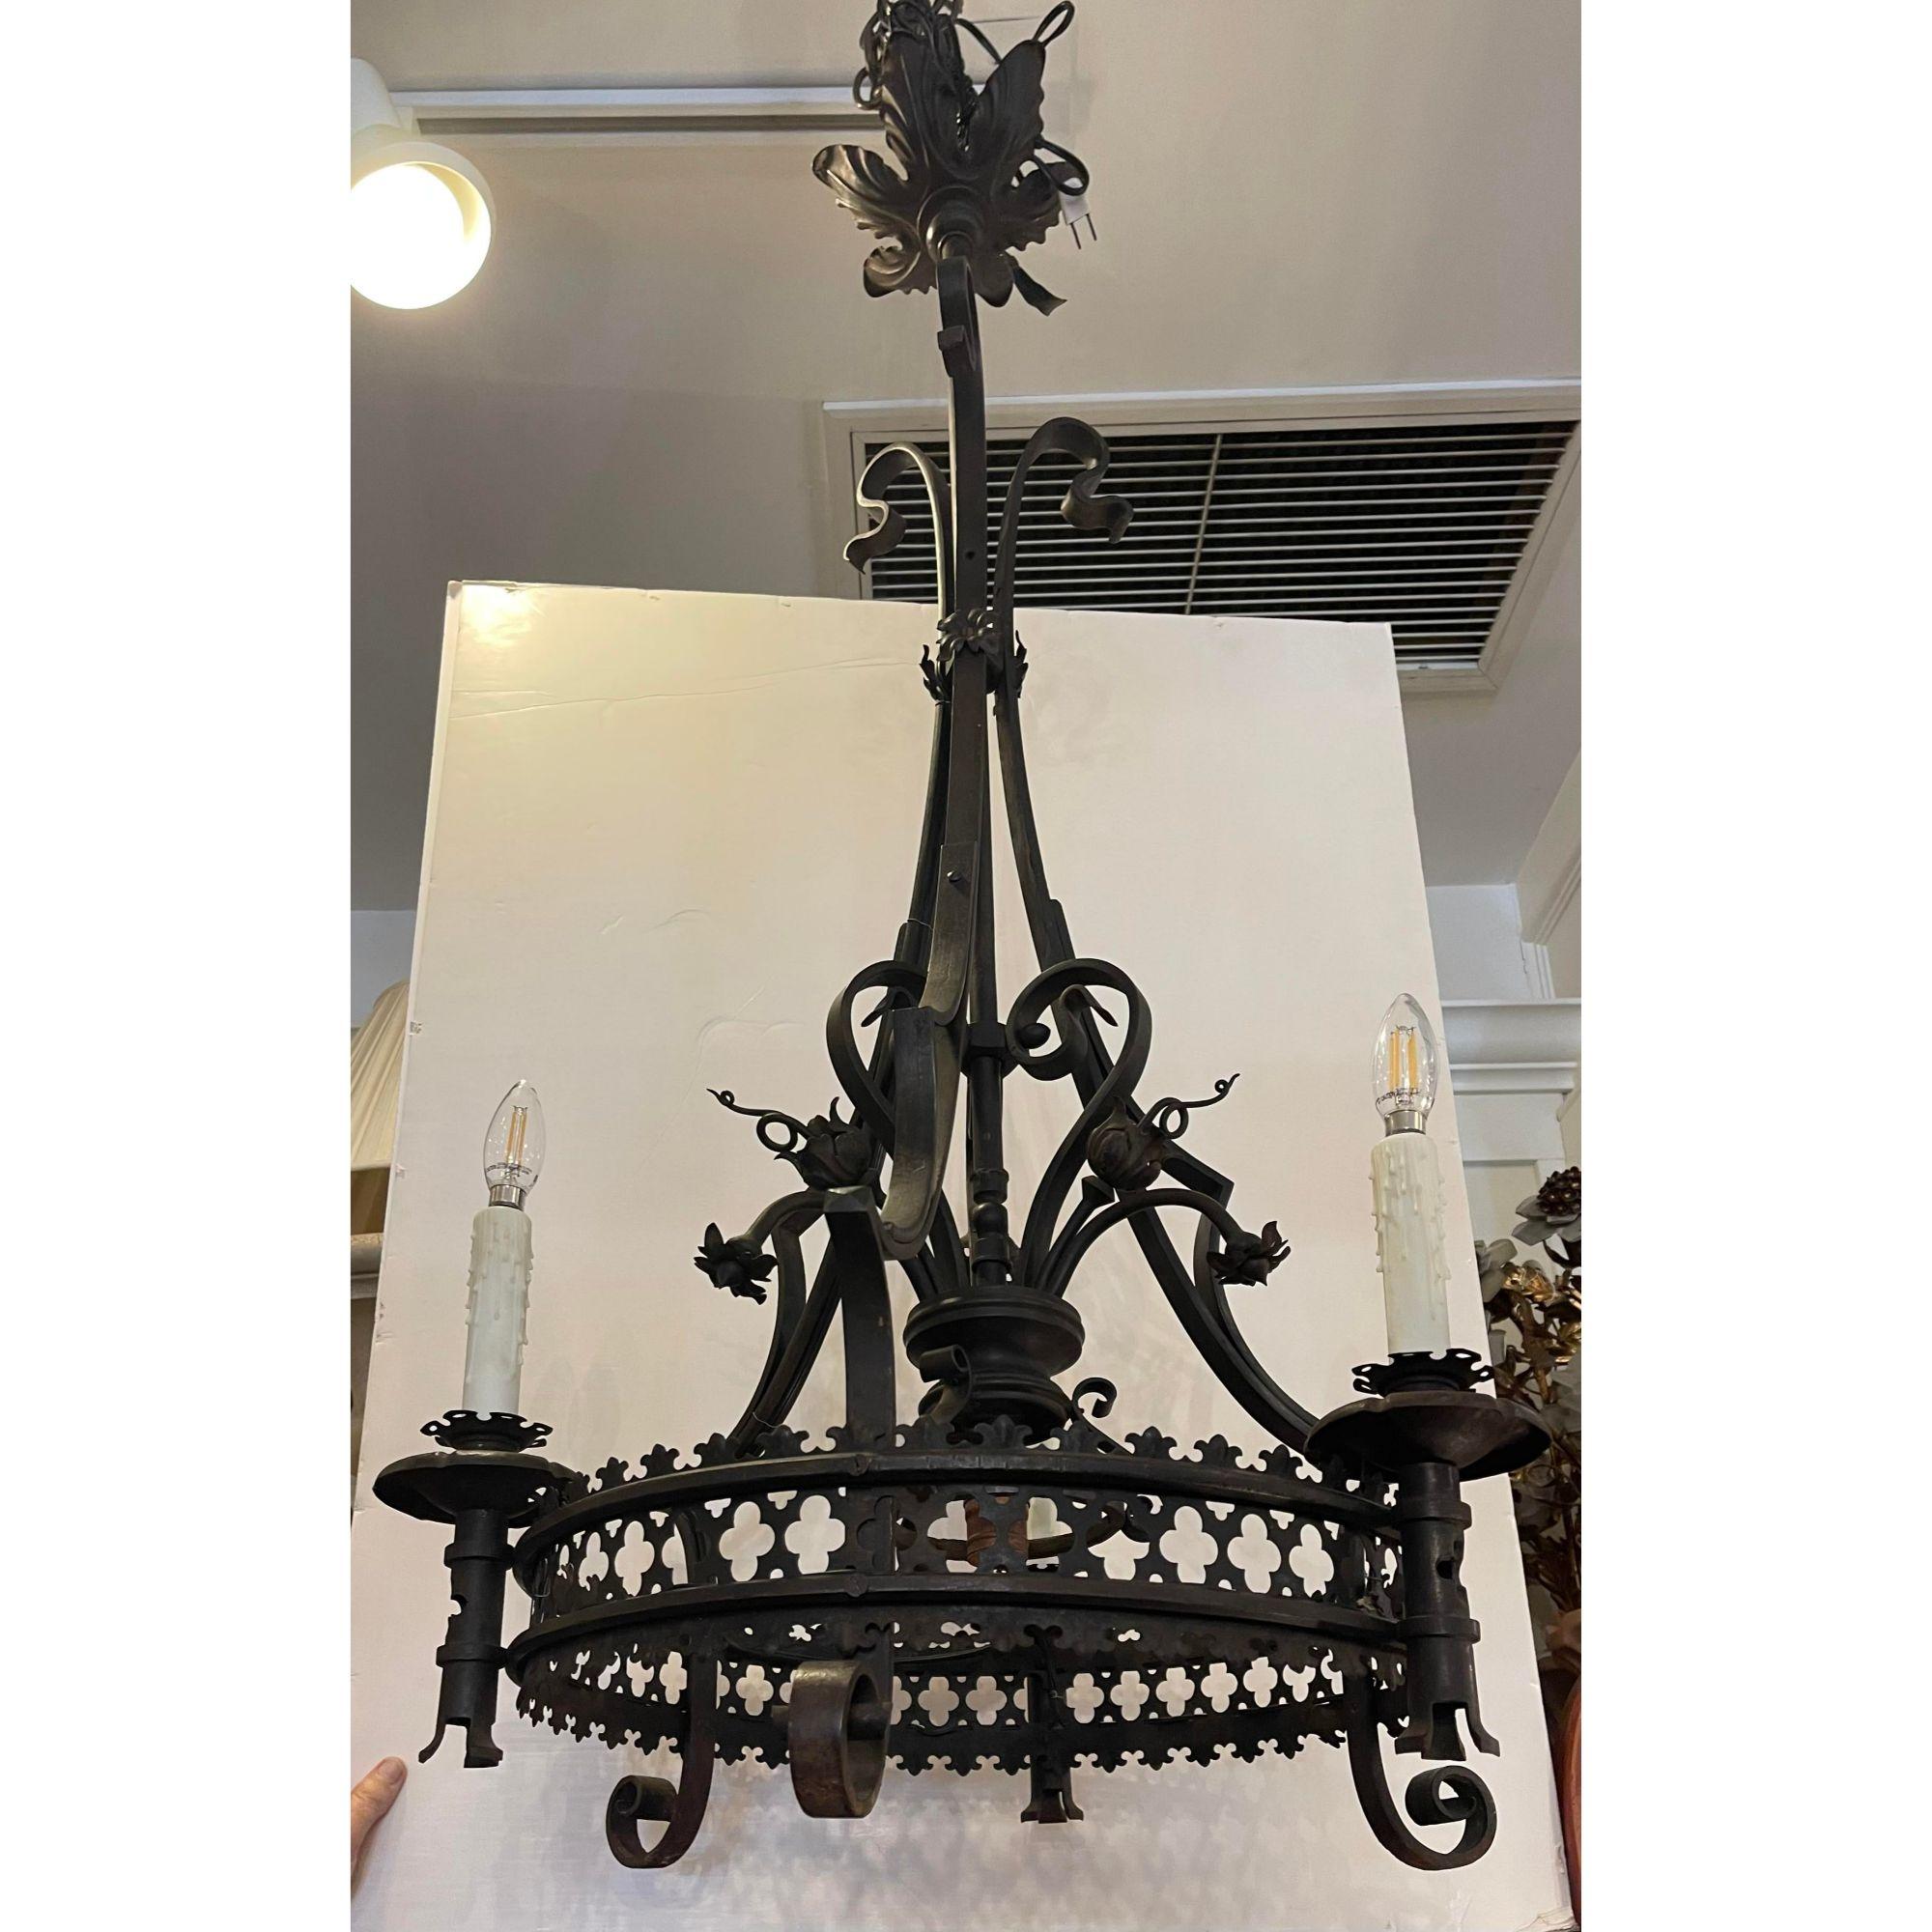 Antique Spanish Colonial wrought iron chandelier

Additional information: 
Materials: lights, wrought iron
Color: black
Period: 1920s
Styles: Spanish Colonial
Power sources: Up to 120V (US Standard) Hardwired
Item Type: Vintage, Antique or